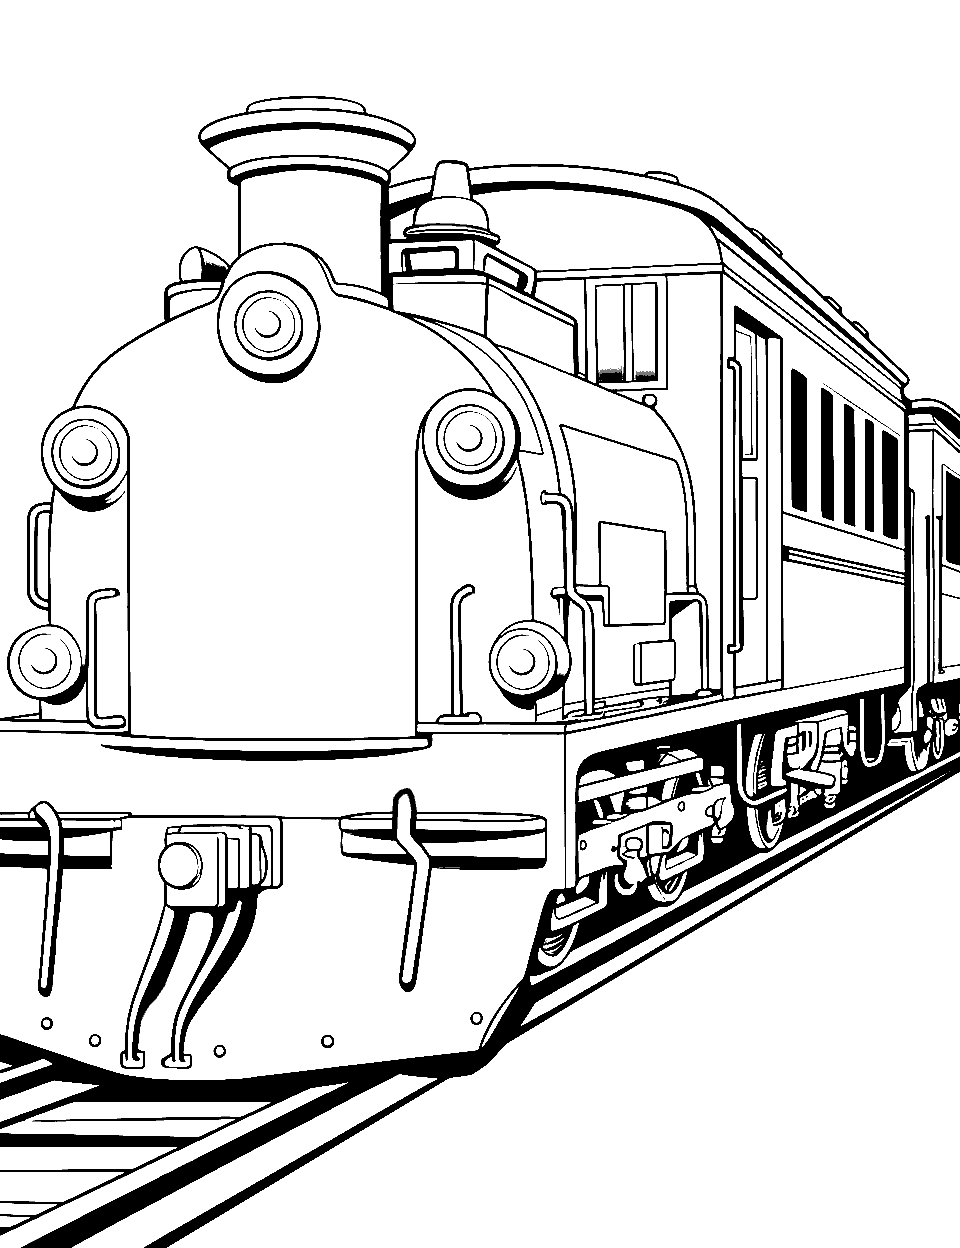 Firefighter Train Mission Coloring Page - A fire department train for emergencies.